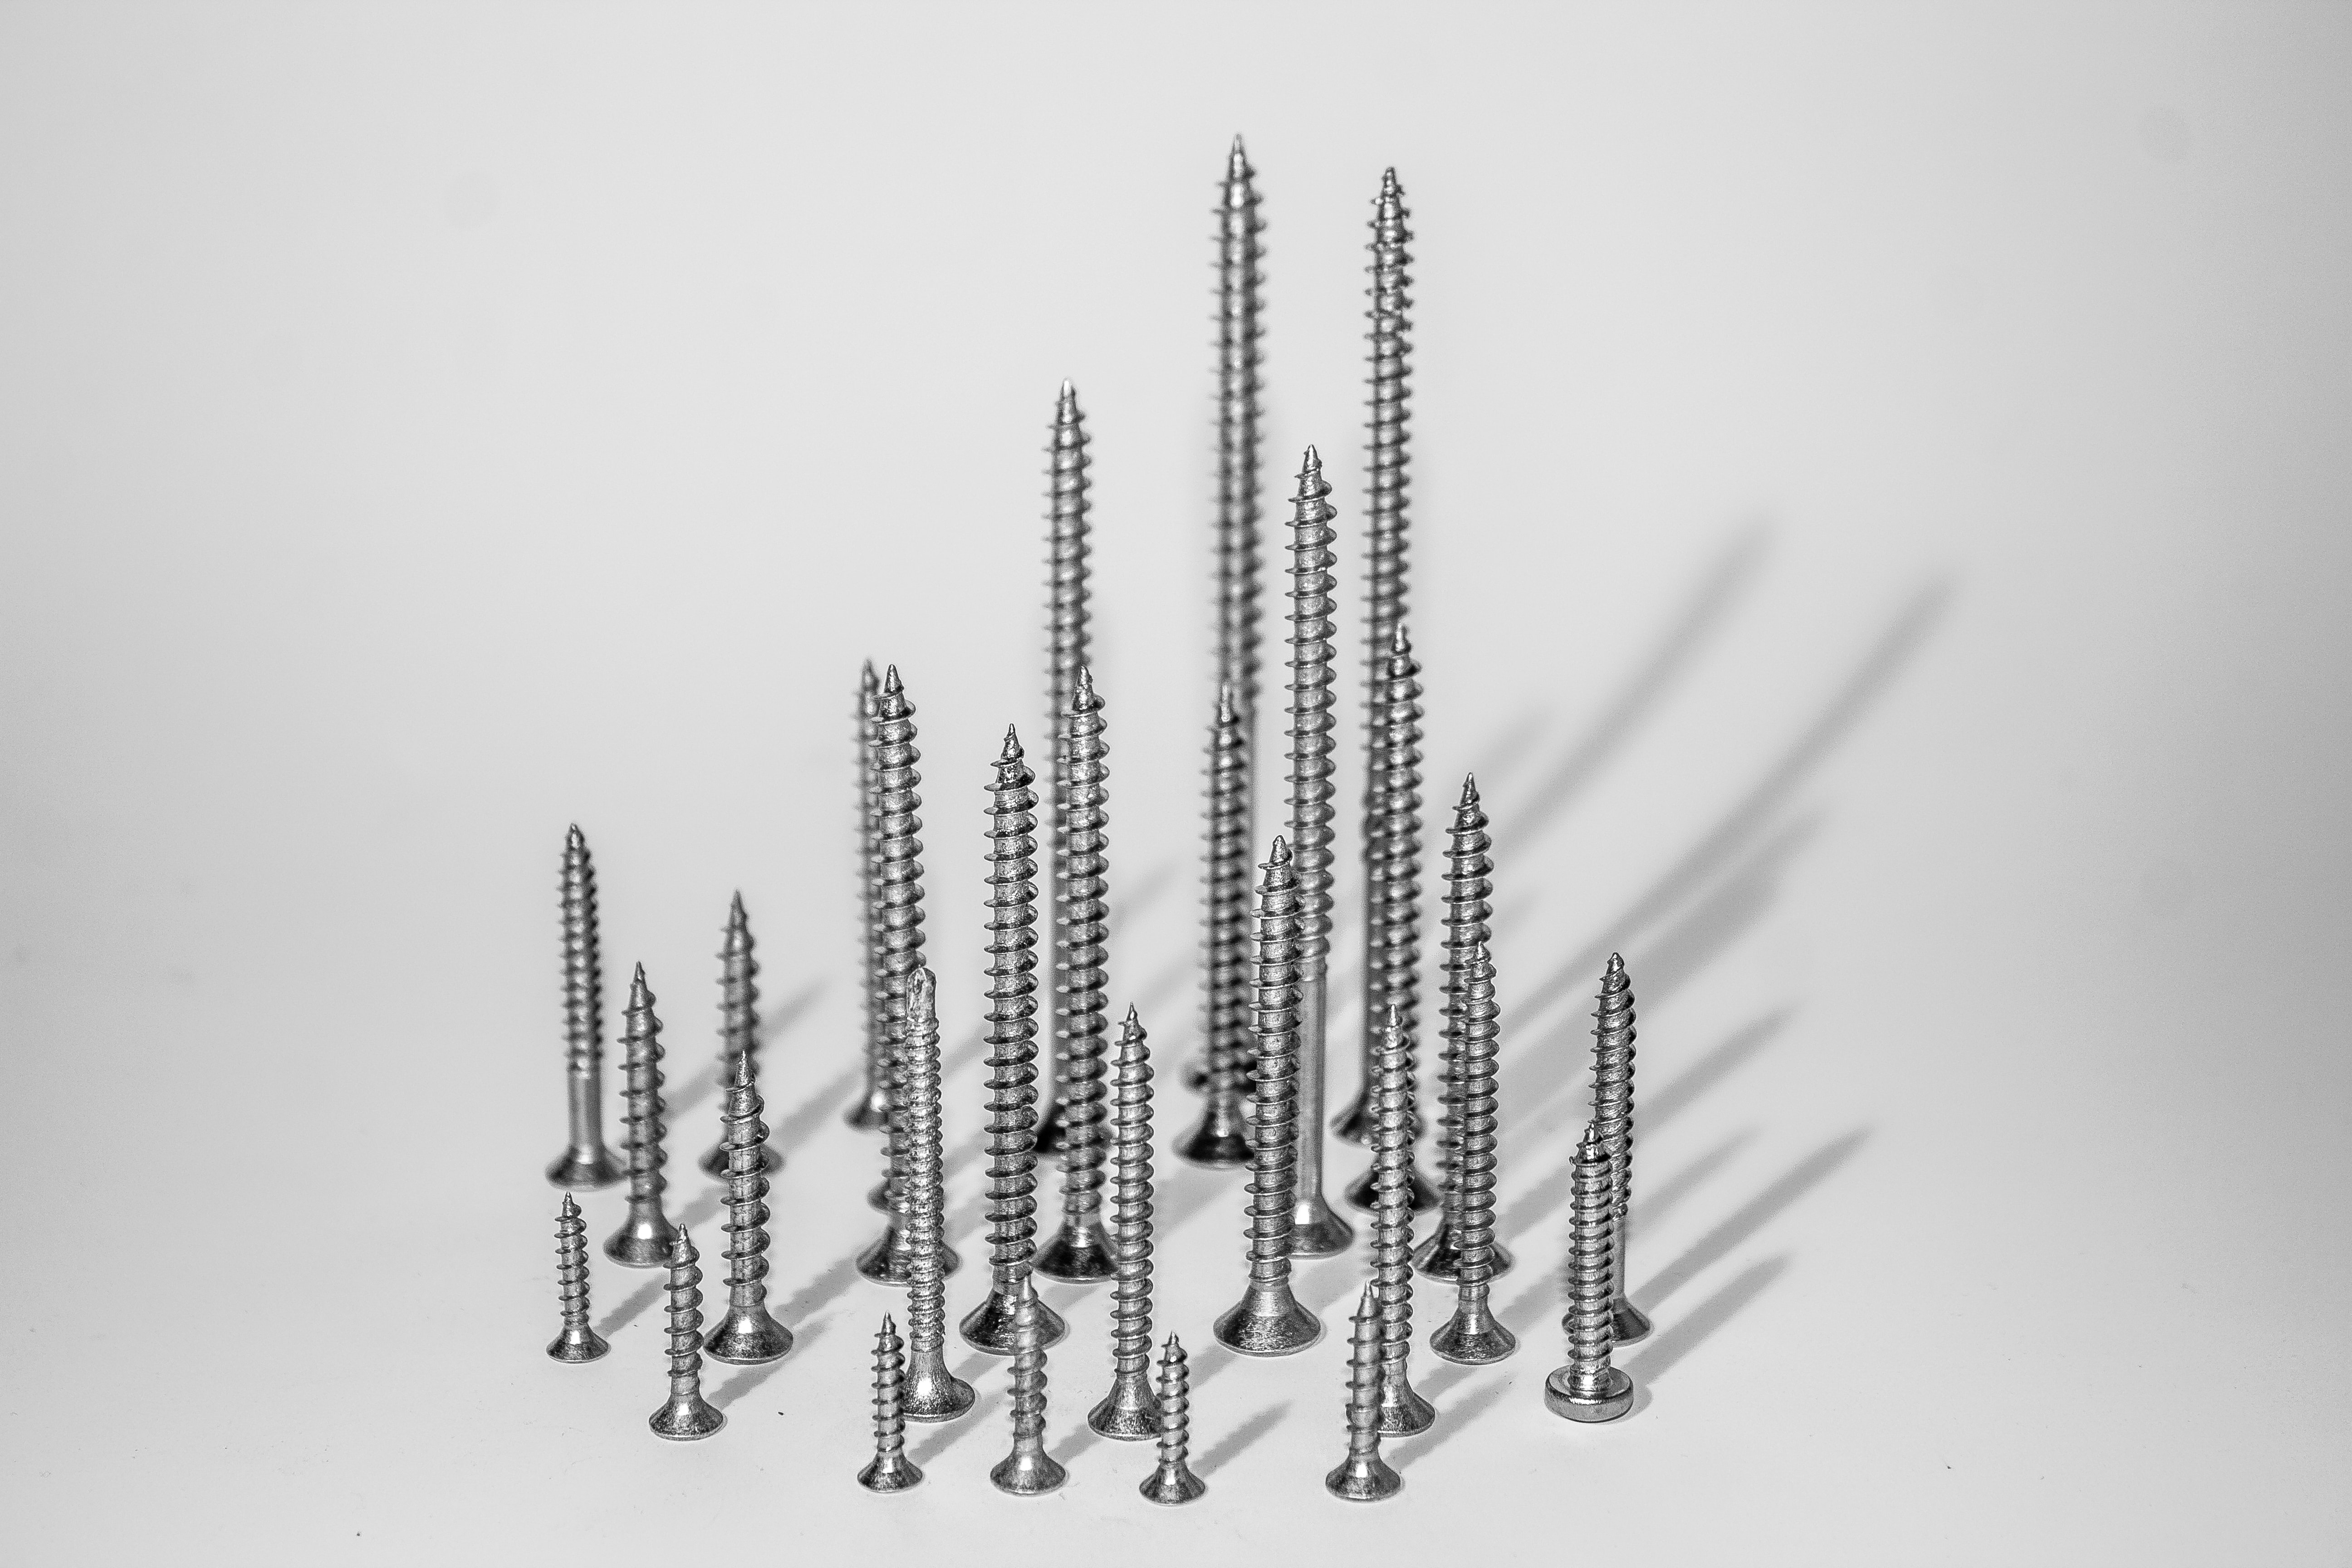  A close-up of a collection of screws placed on the white surface.